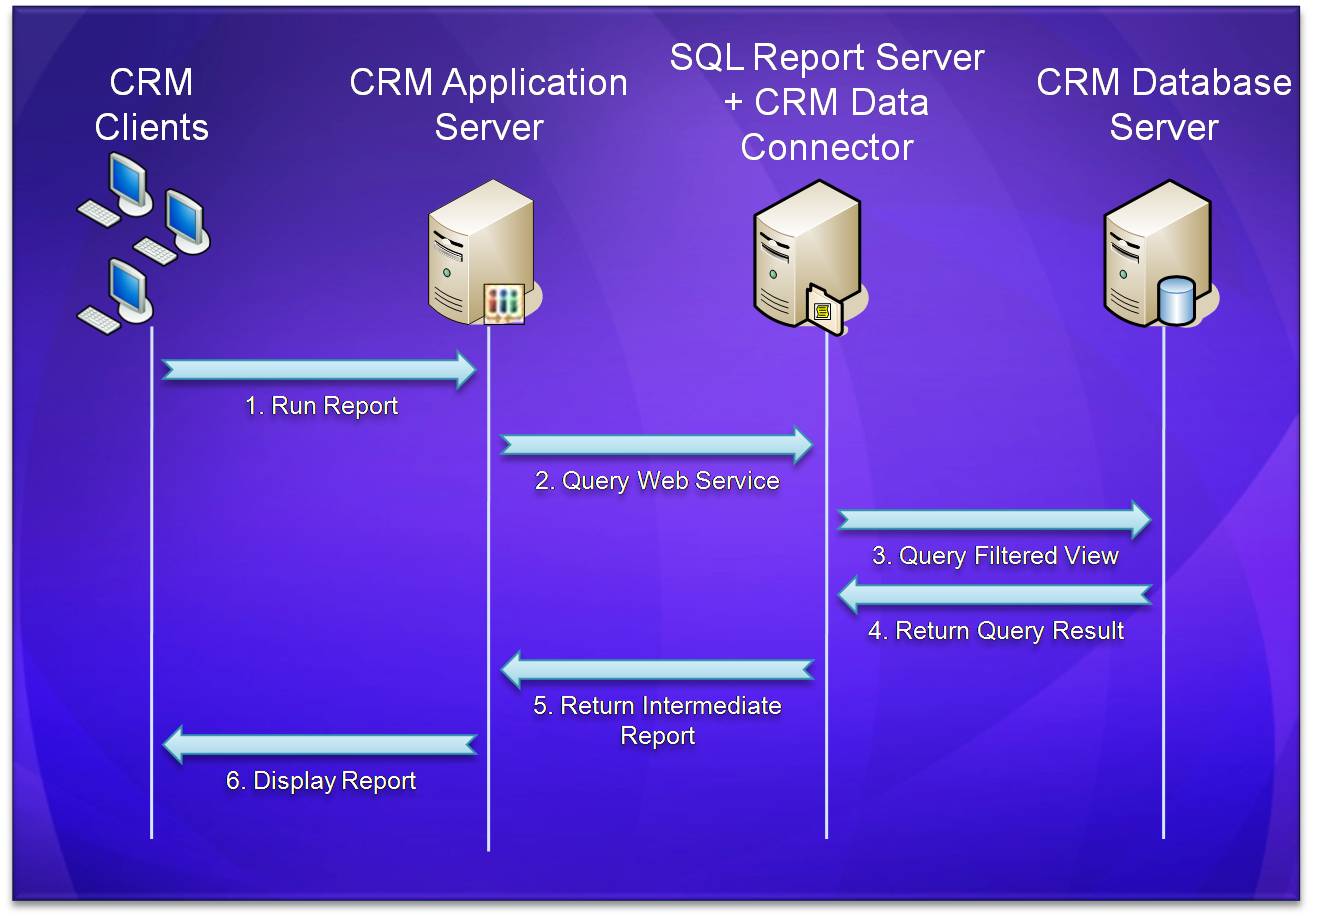 Running The Report In CRM 4.0